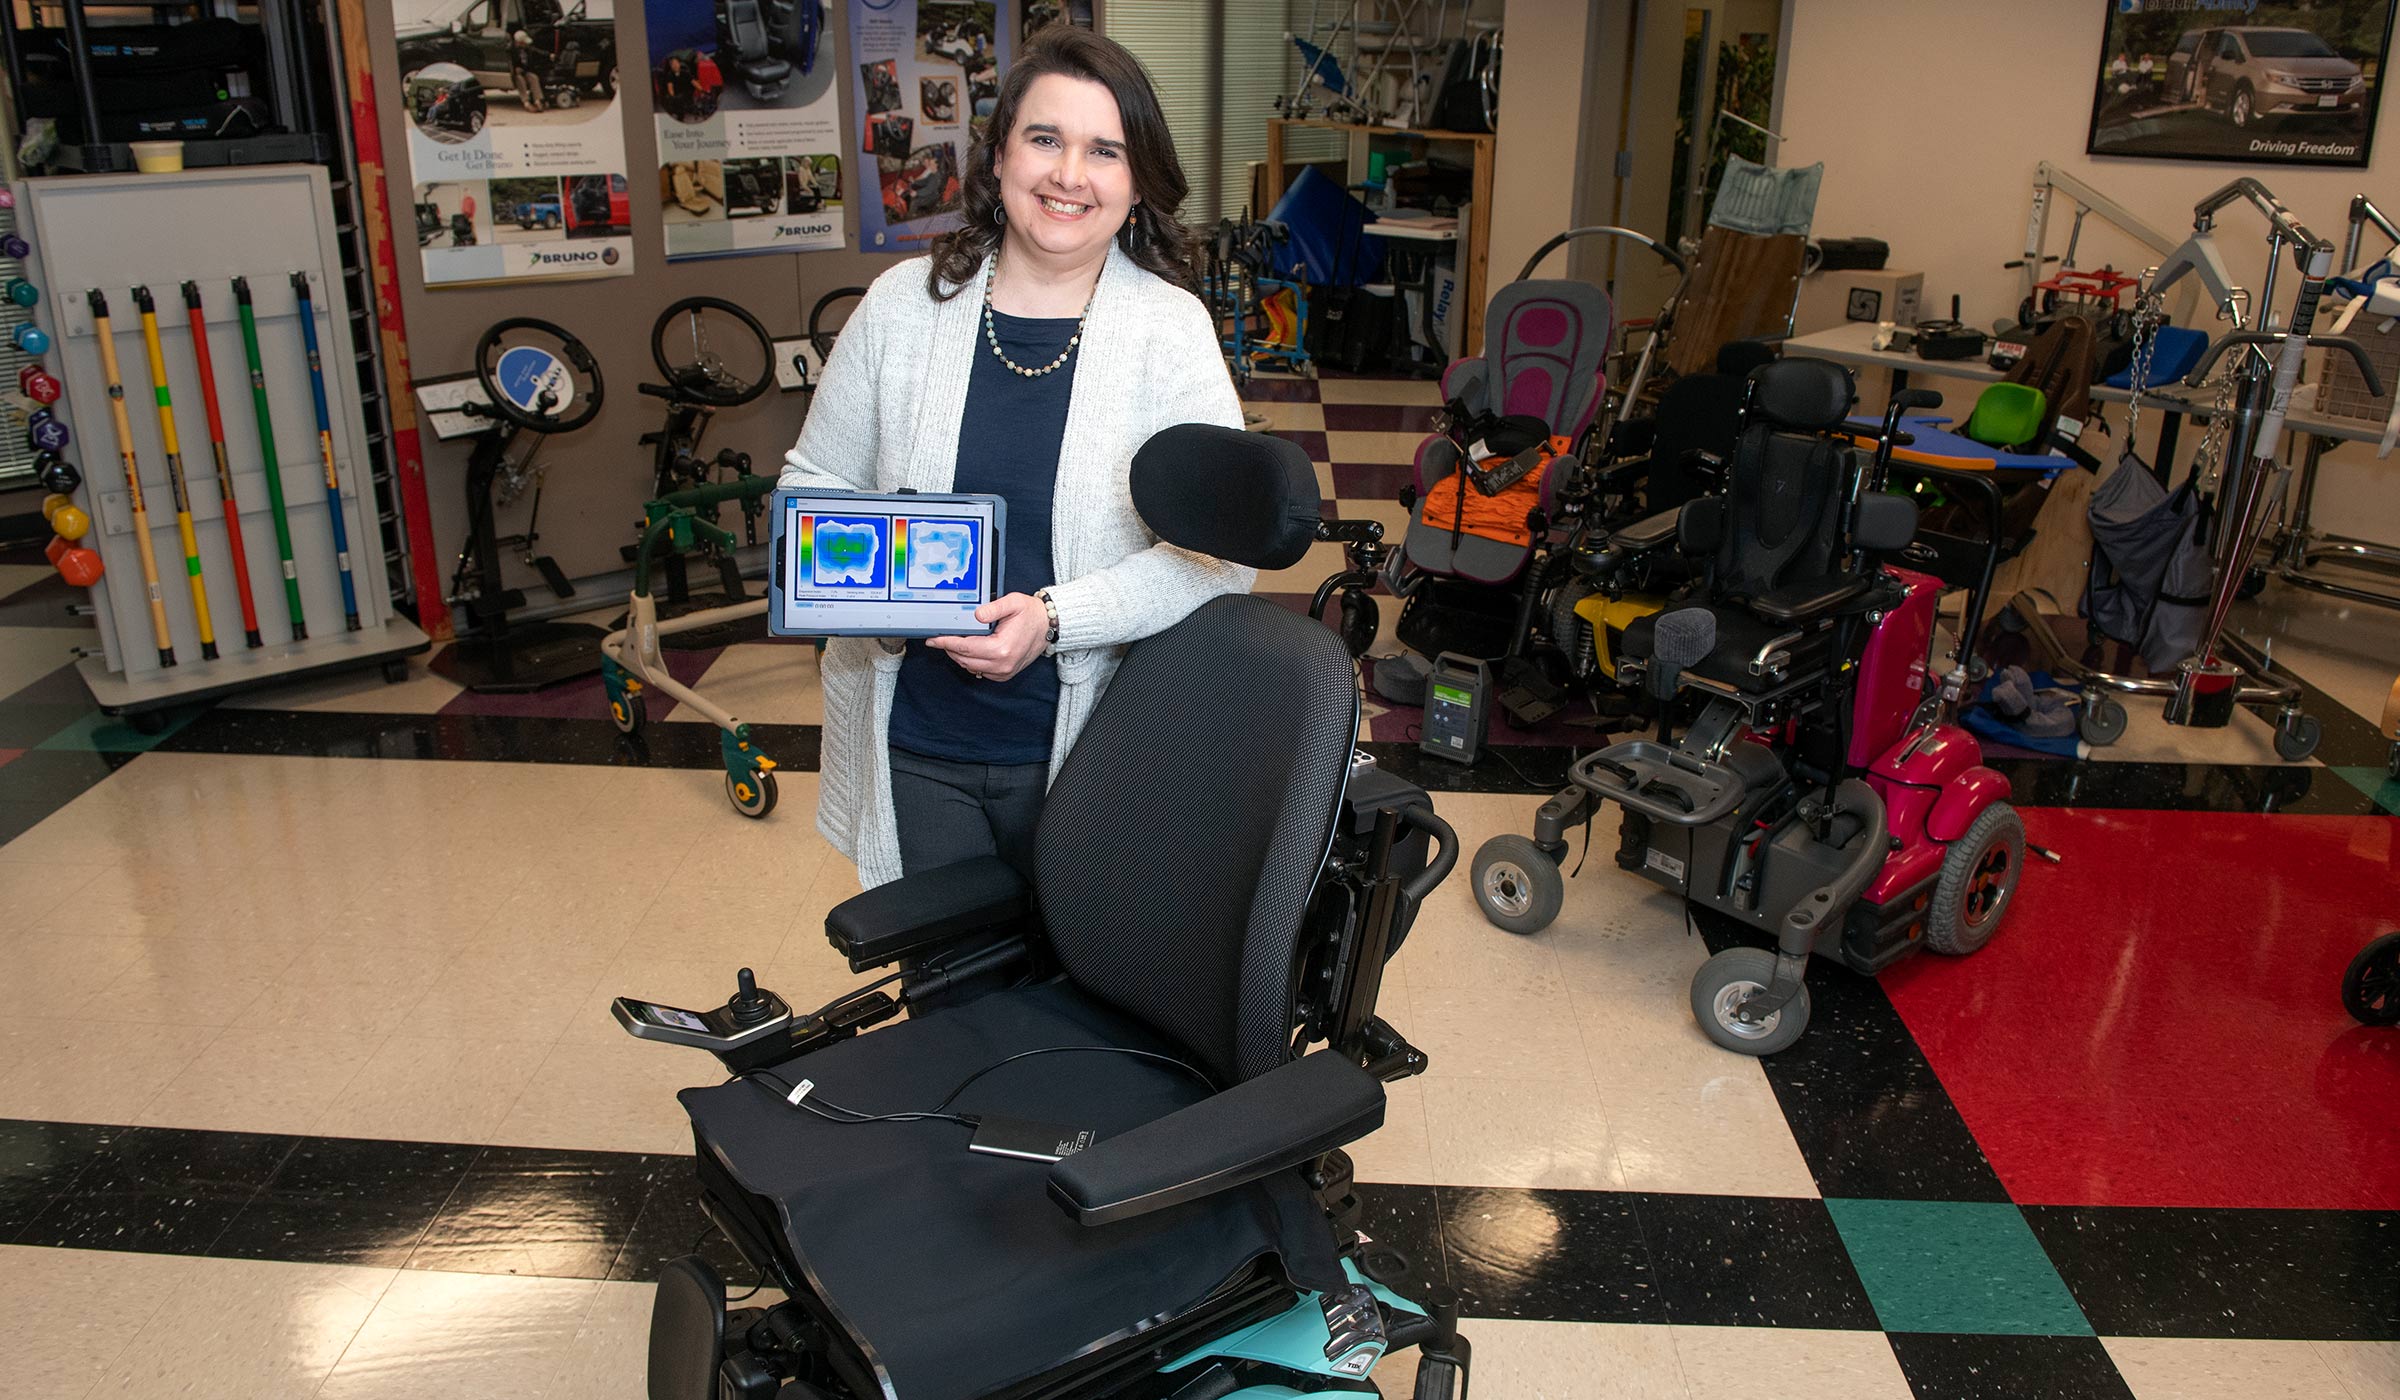 Rebecca Mathis standing in front of a wheelchair holding an iPad.